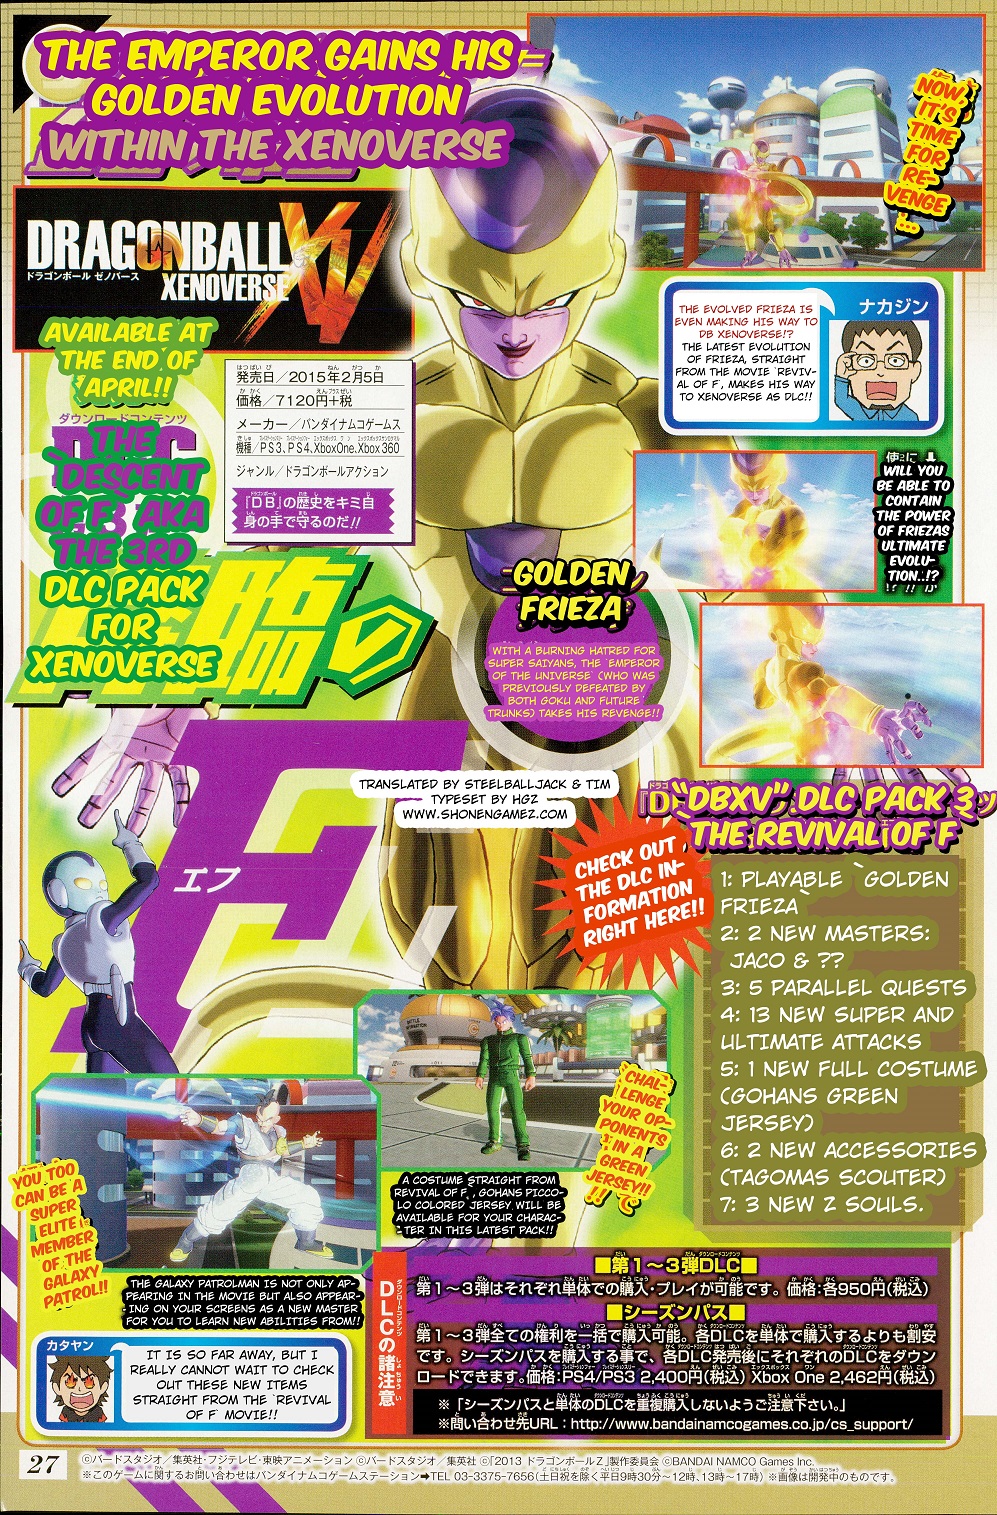 Dragon Ball Xenoverse Dlc Pack 3 Revealed Capsule Computers